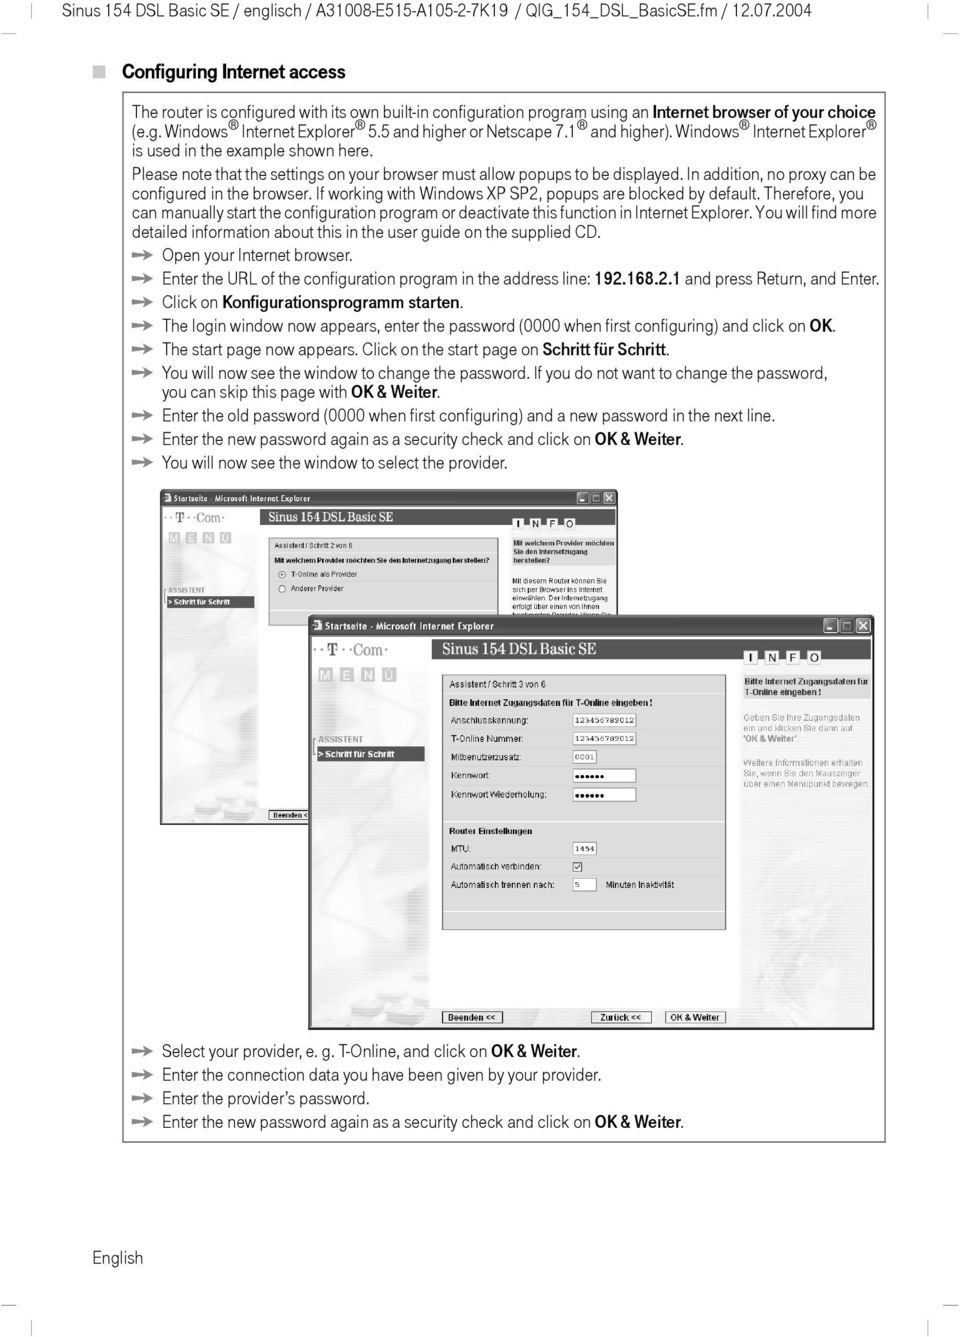 5 and higher or Netscape 7.1 and higher). Windows Internet Explorer is used in the example shown here. Please note that the settings on your browser must allow popups to be displayed.